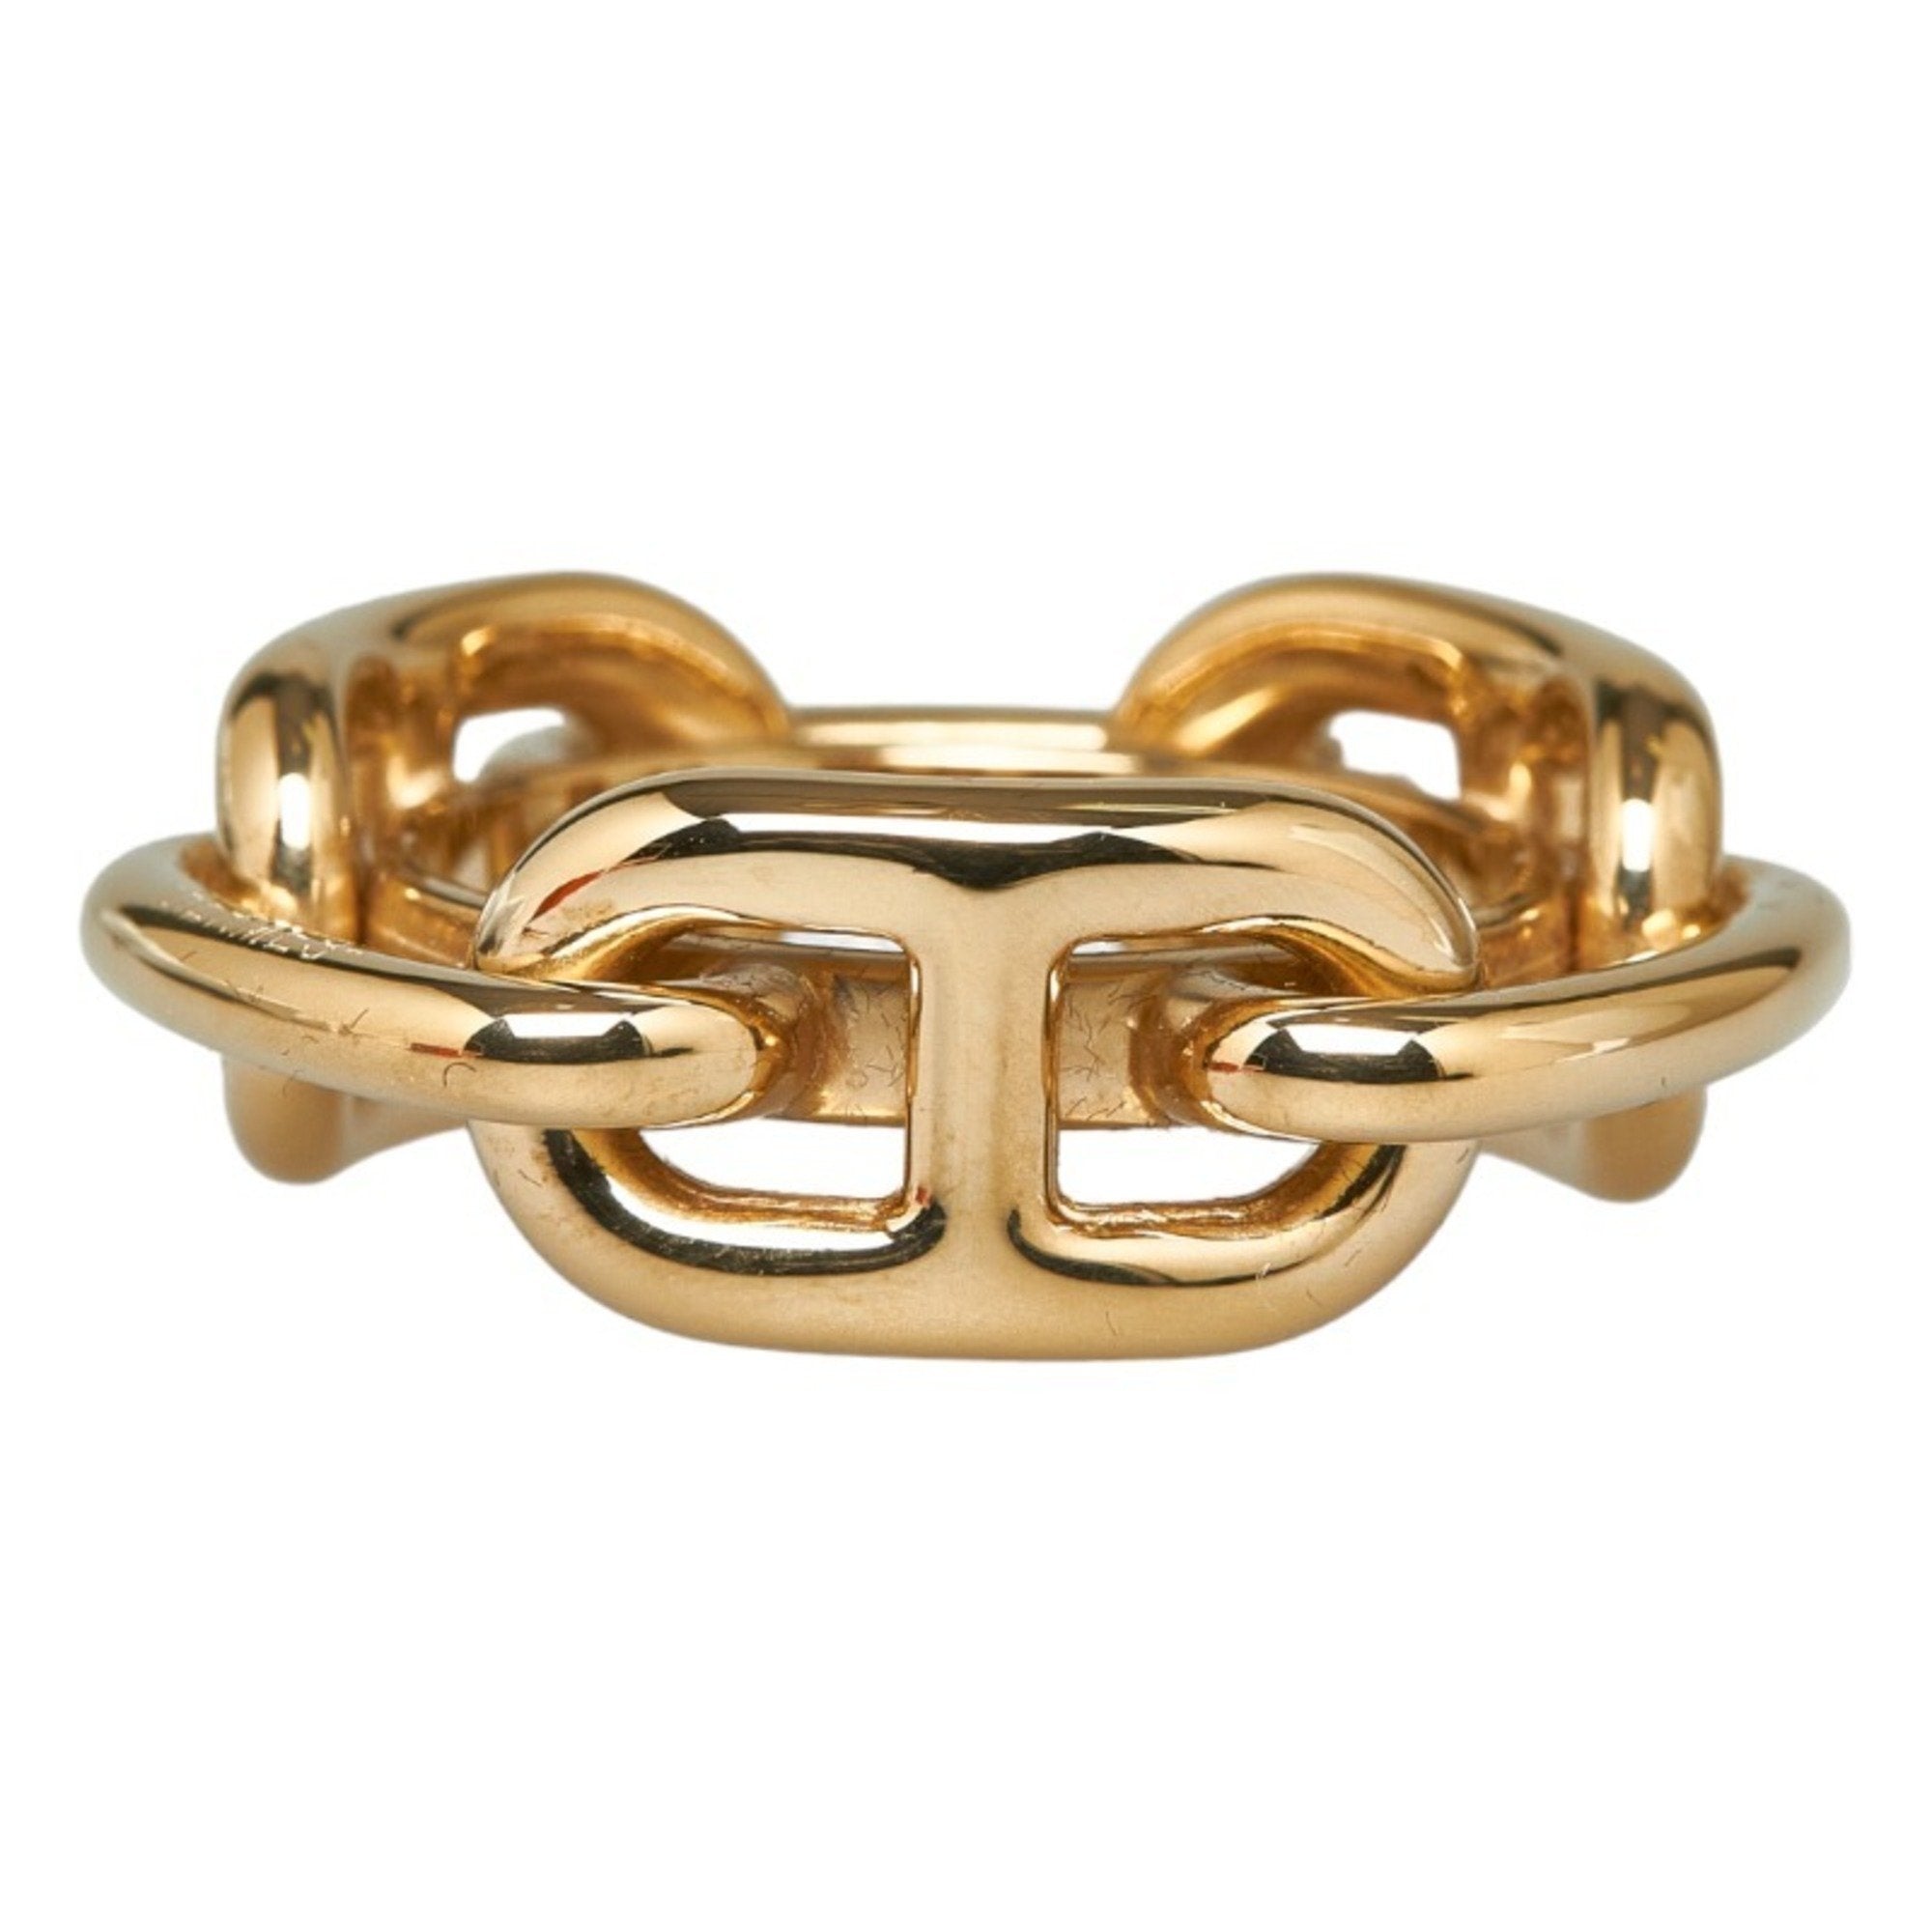 image of HERMES Legate Chaine d'Ancre Scarf Ring Gold Plated Women's